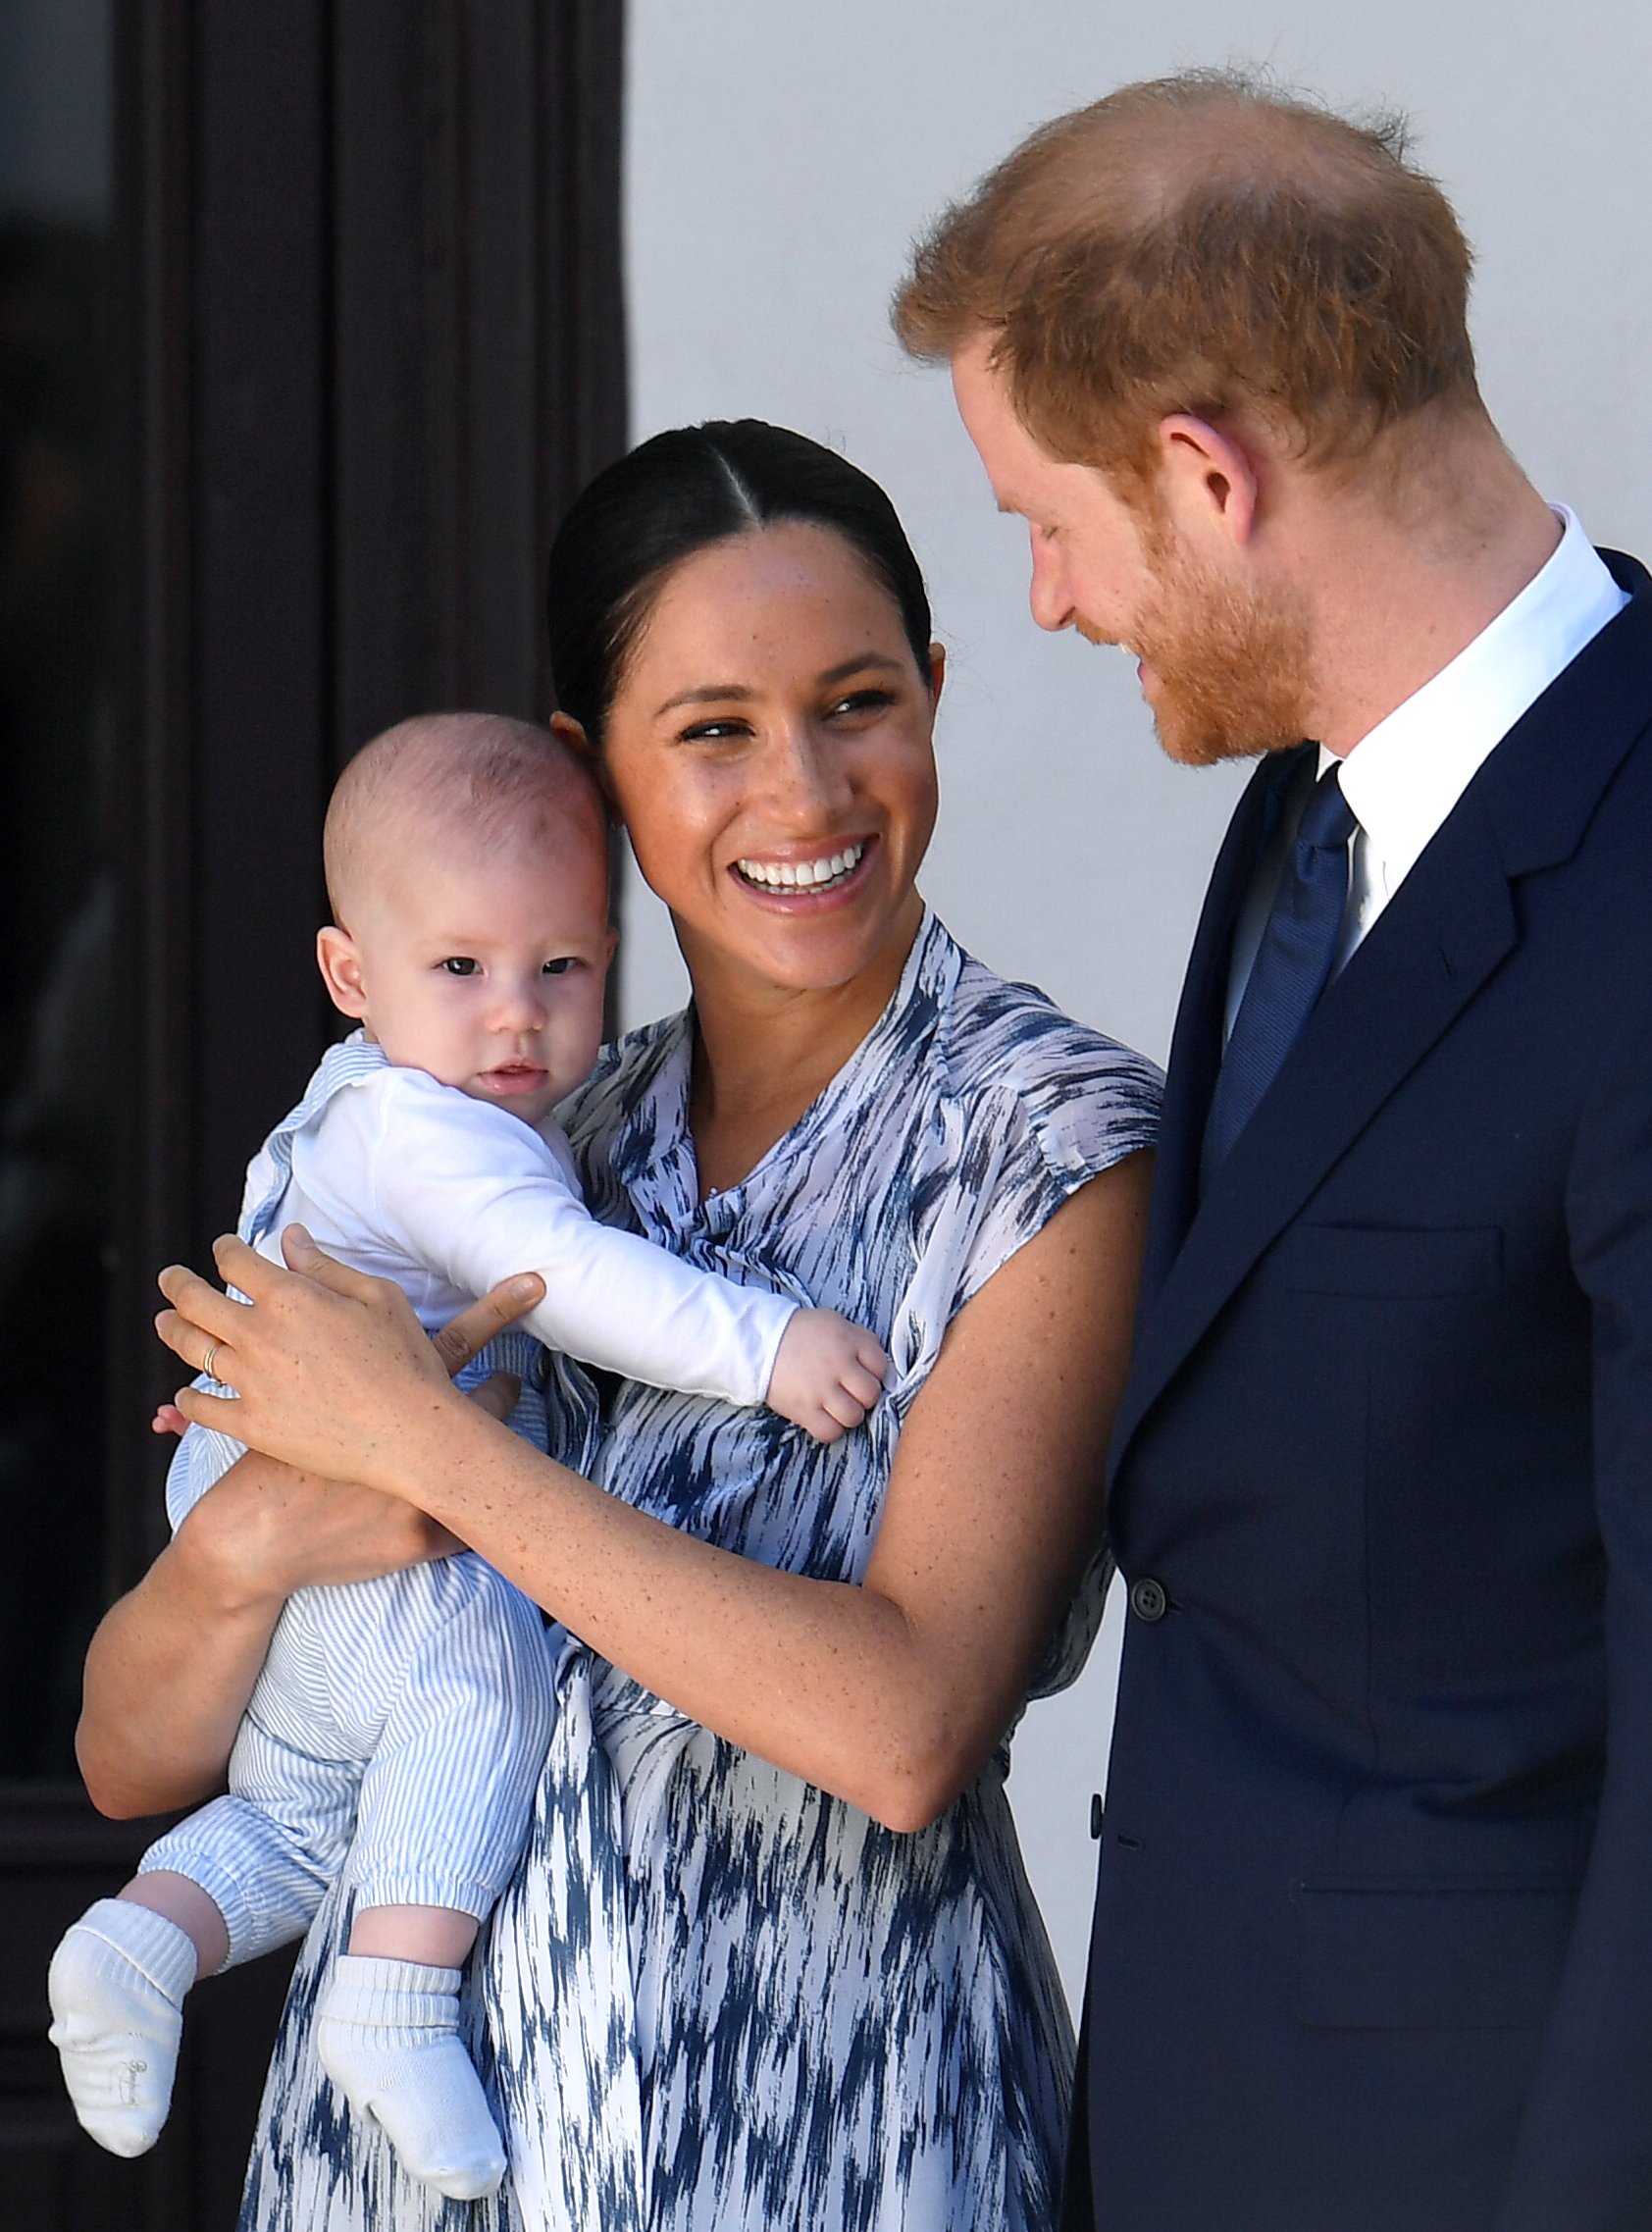 rince Harry, Duke of Sussex, Meghan, Duchess of Sussex and their baby son Archie Mountbatten-Windsor meet Archbishop Desmond Tutu at the Desmond & Leah Tutu Legacy Foundation during their royal tour of South Africa on September 25, 2019 in Cape Town, South Africa | Source: Getty Images 